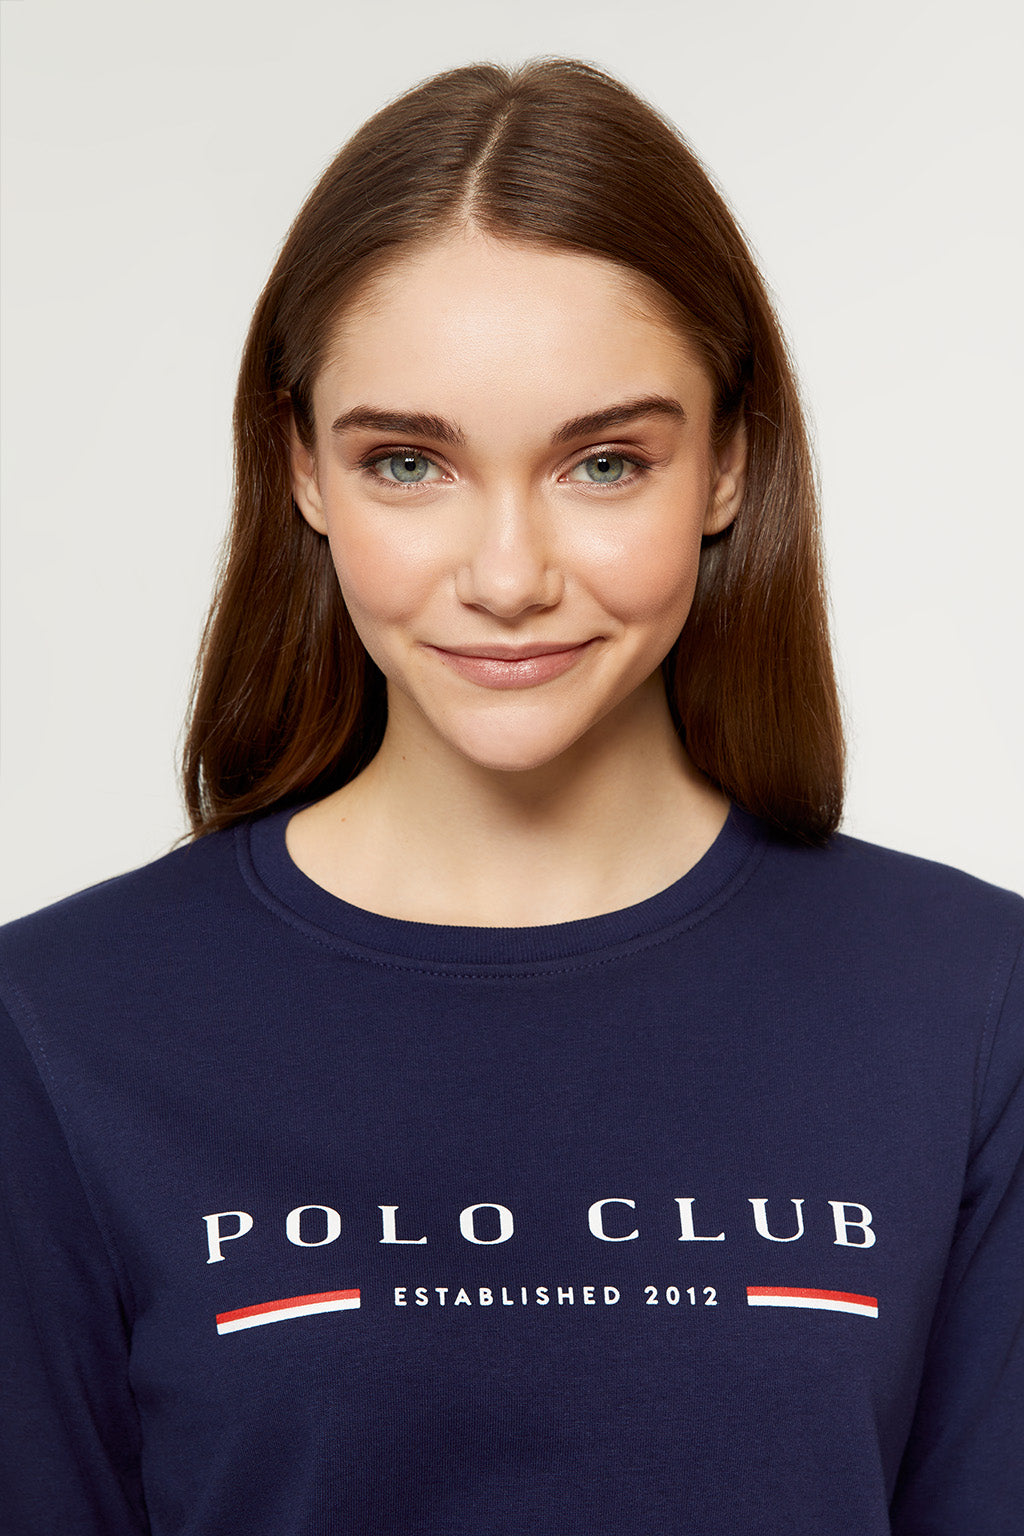 POLO CLUB Polo Club TITLE WOMAN - Sudadera mujer navy - Private